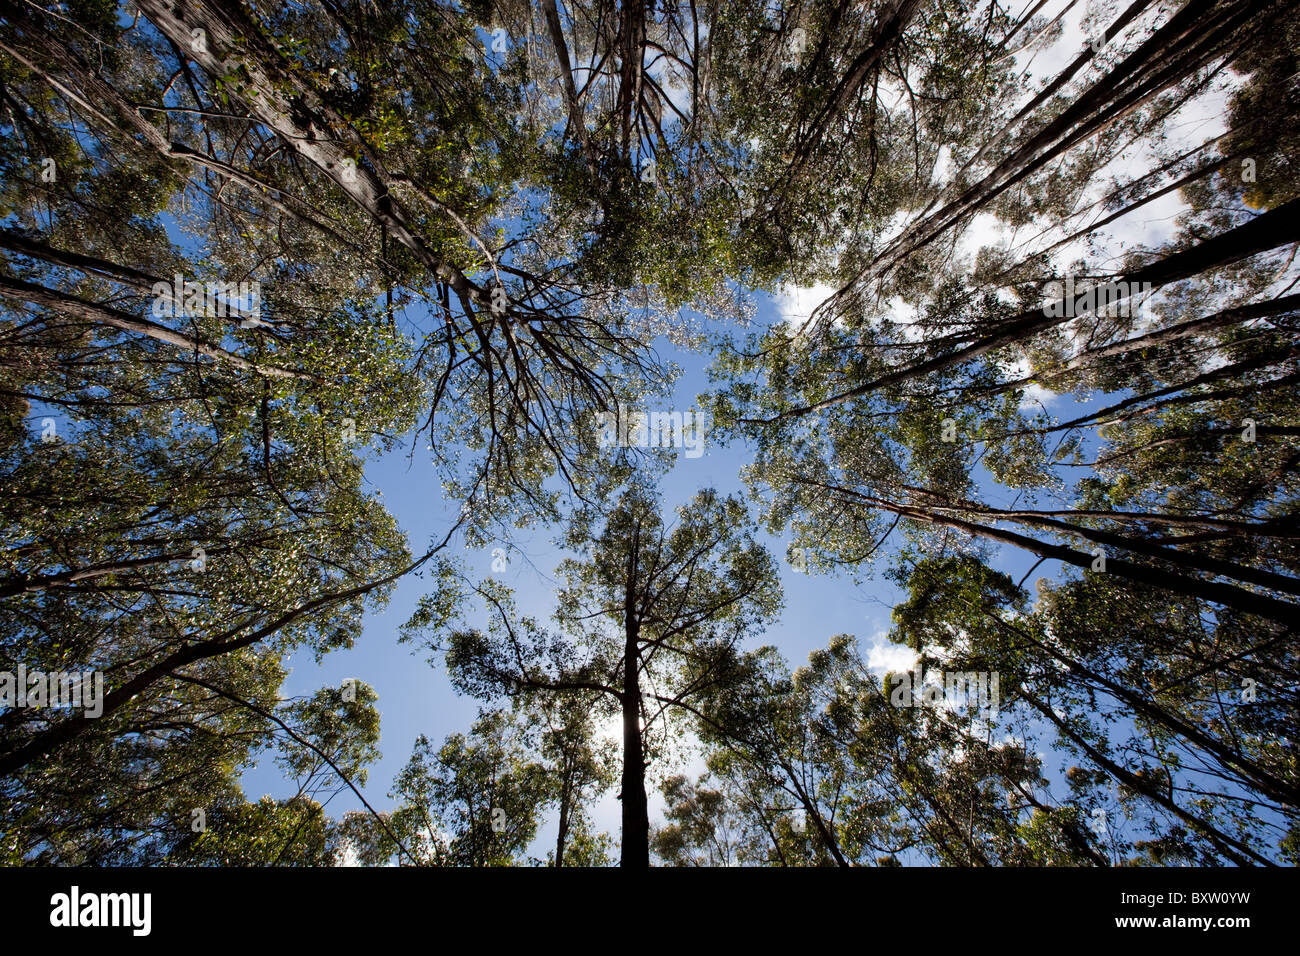 Australia, New South Wales, Lind National Park, Spotted Gum trees in Eucalyptus forest on summer morning Stock Photo